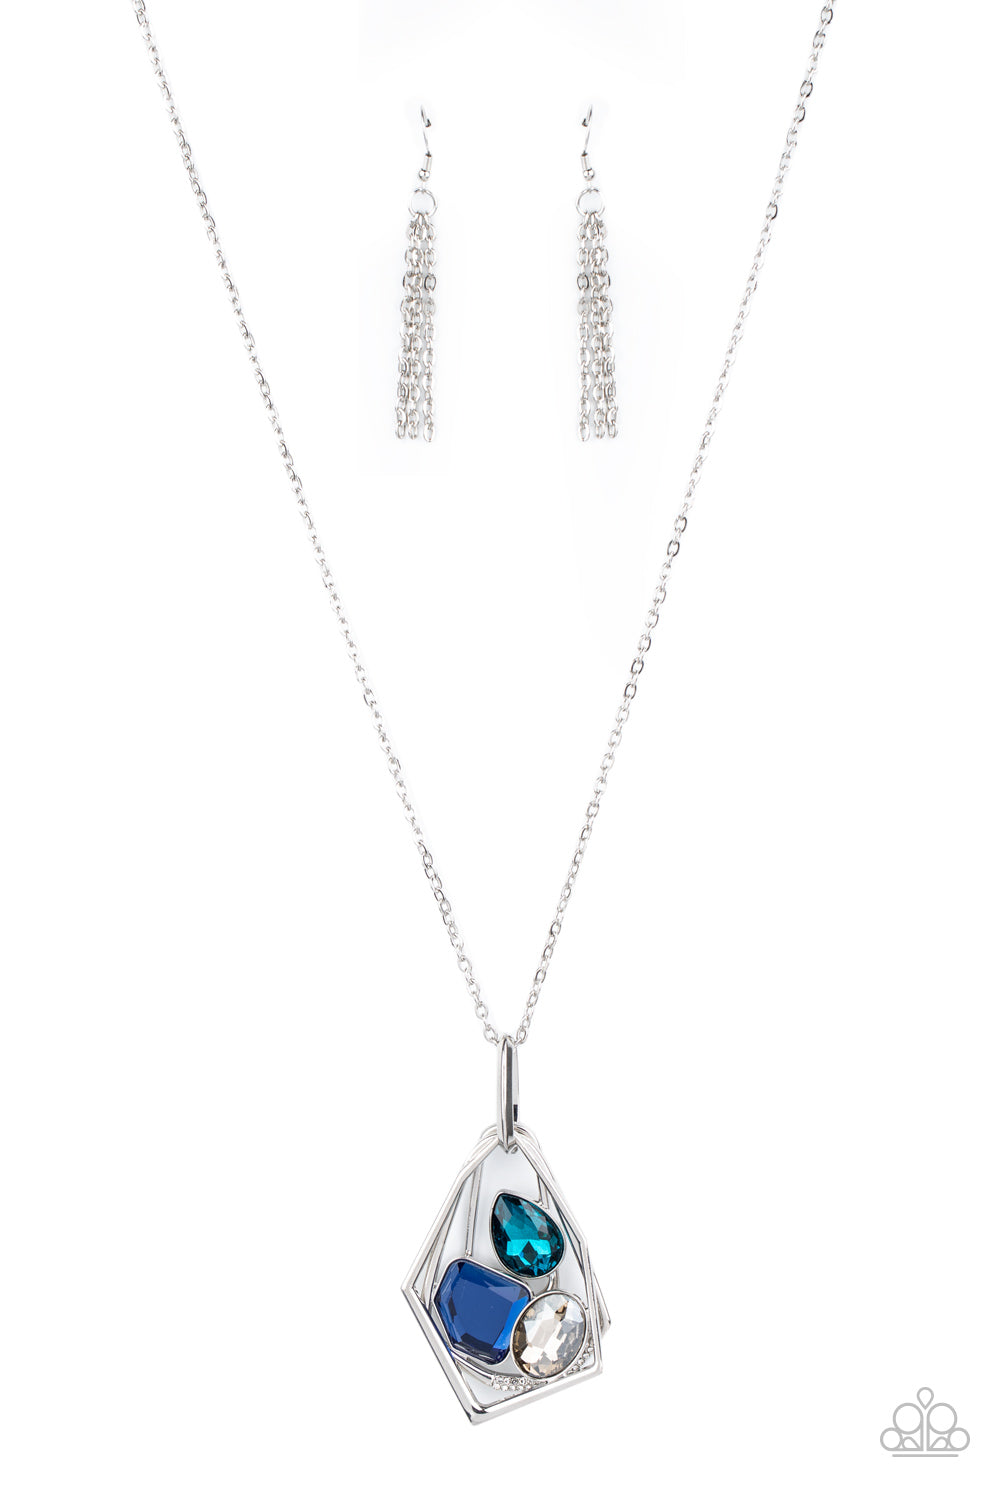 All Systems GLOW - Blue Necklace Set